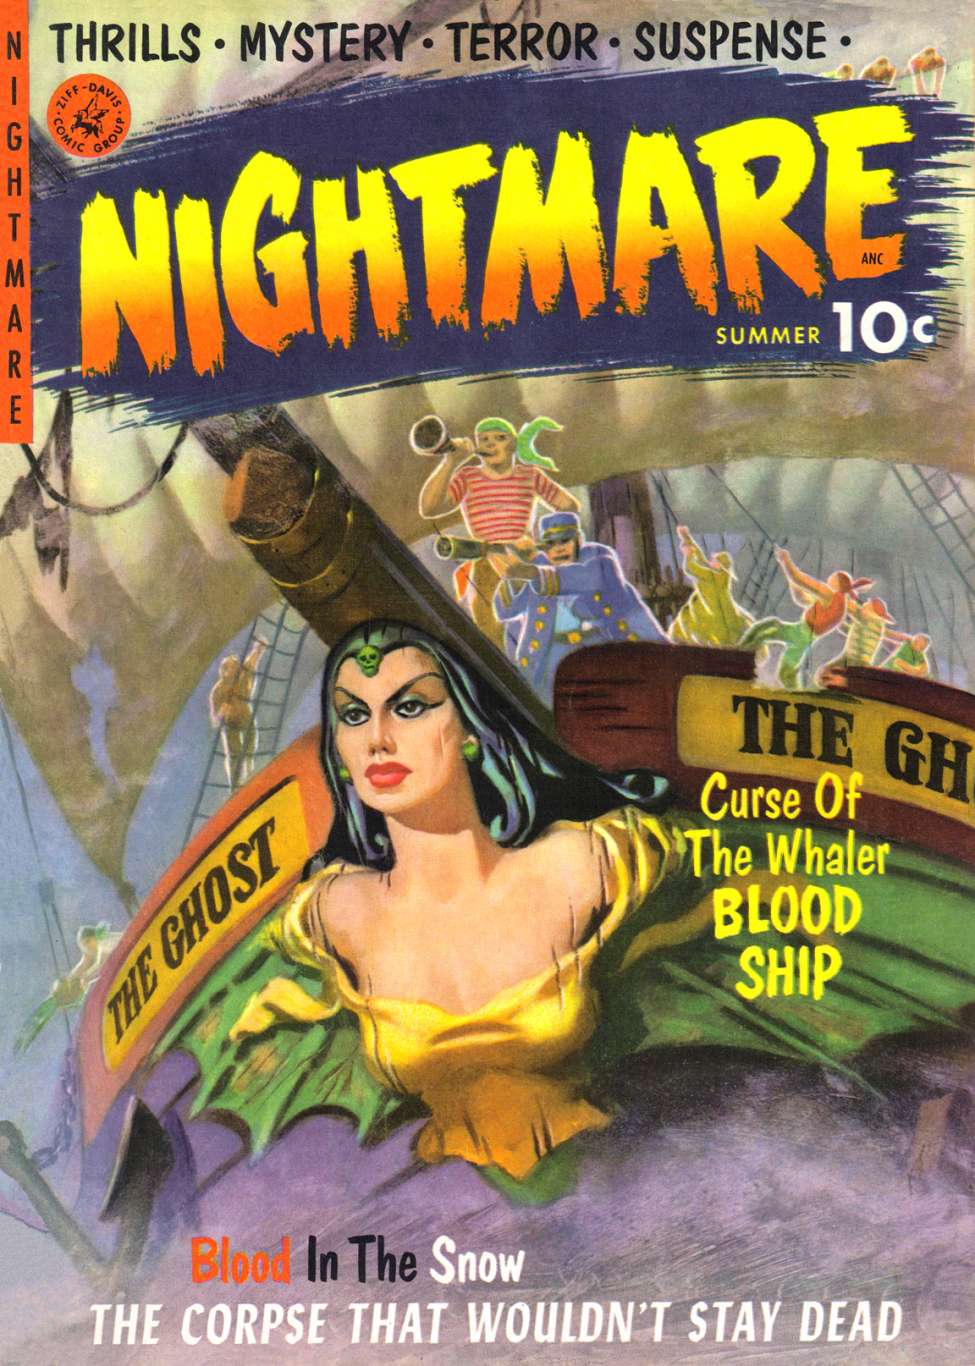 Book Cover For Nightmare 1